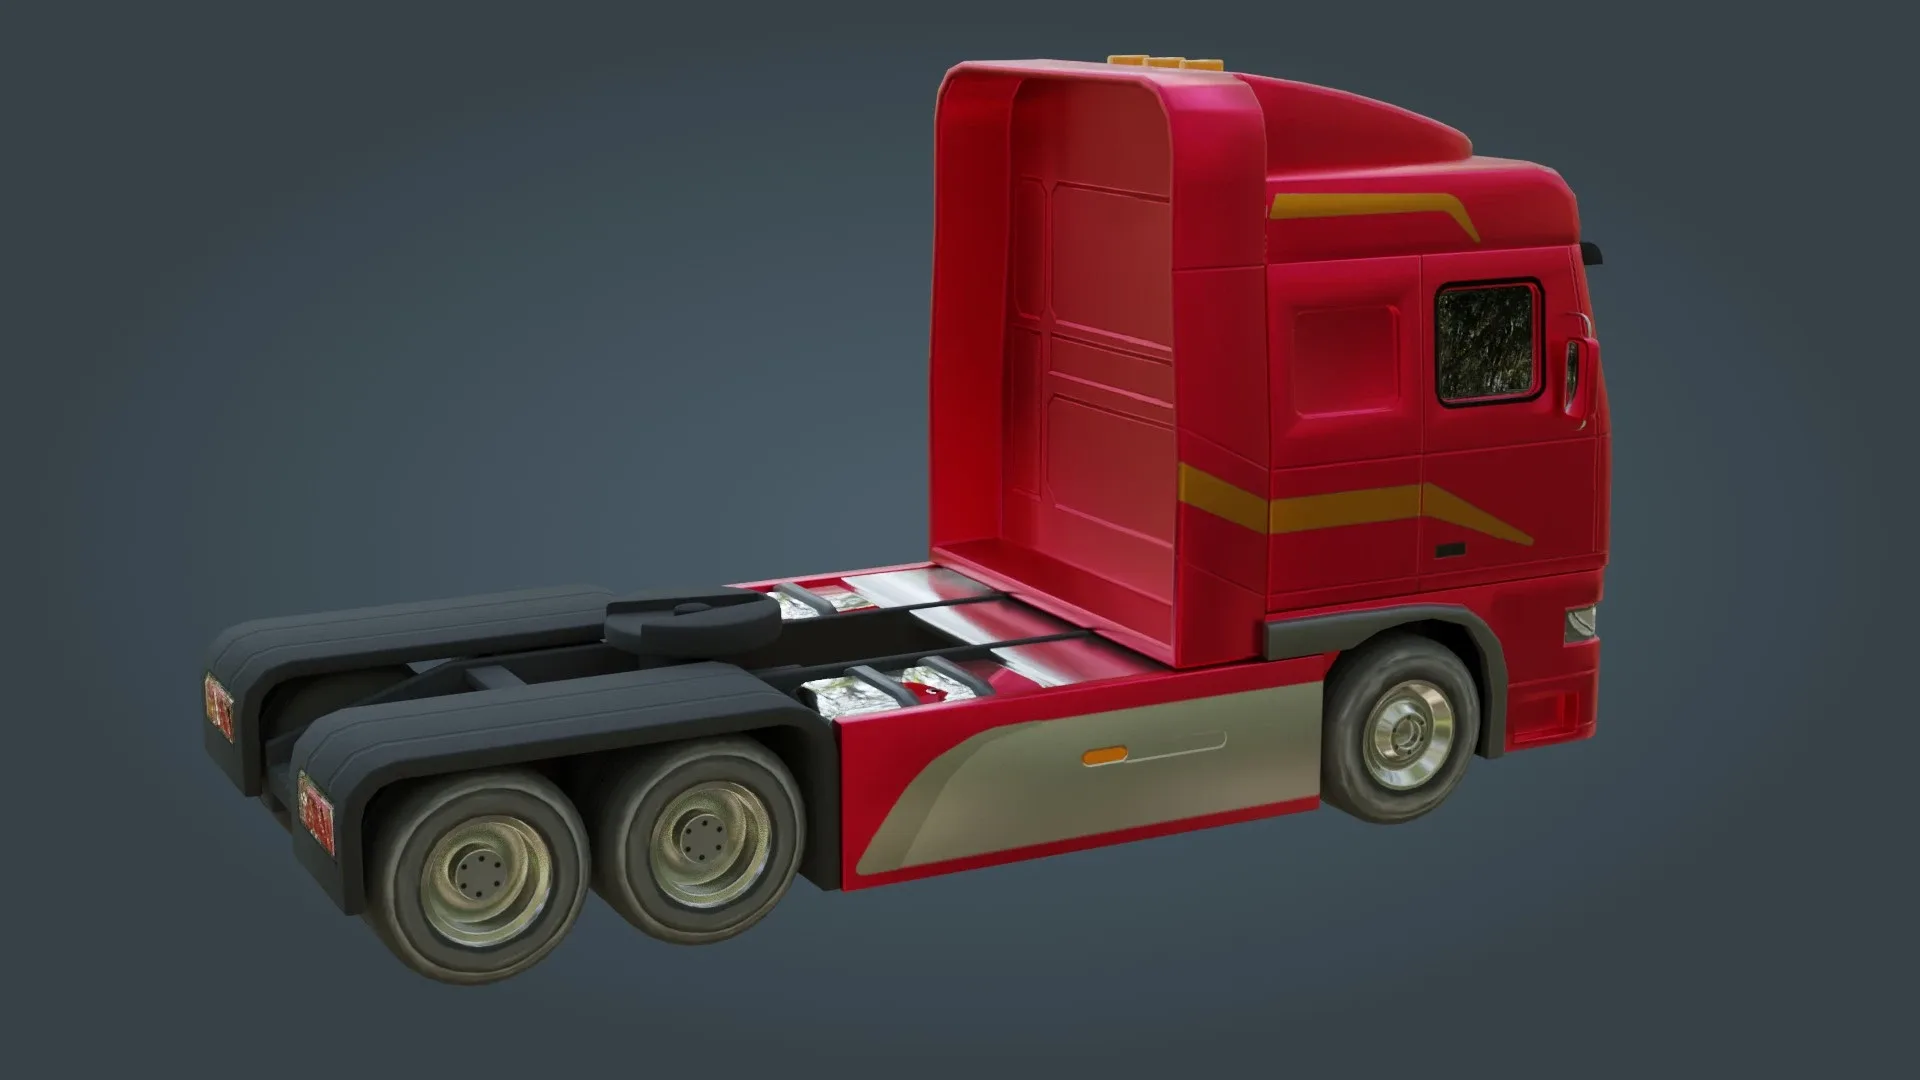 Truck - Low Poly - Game Ready - PBR